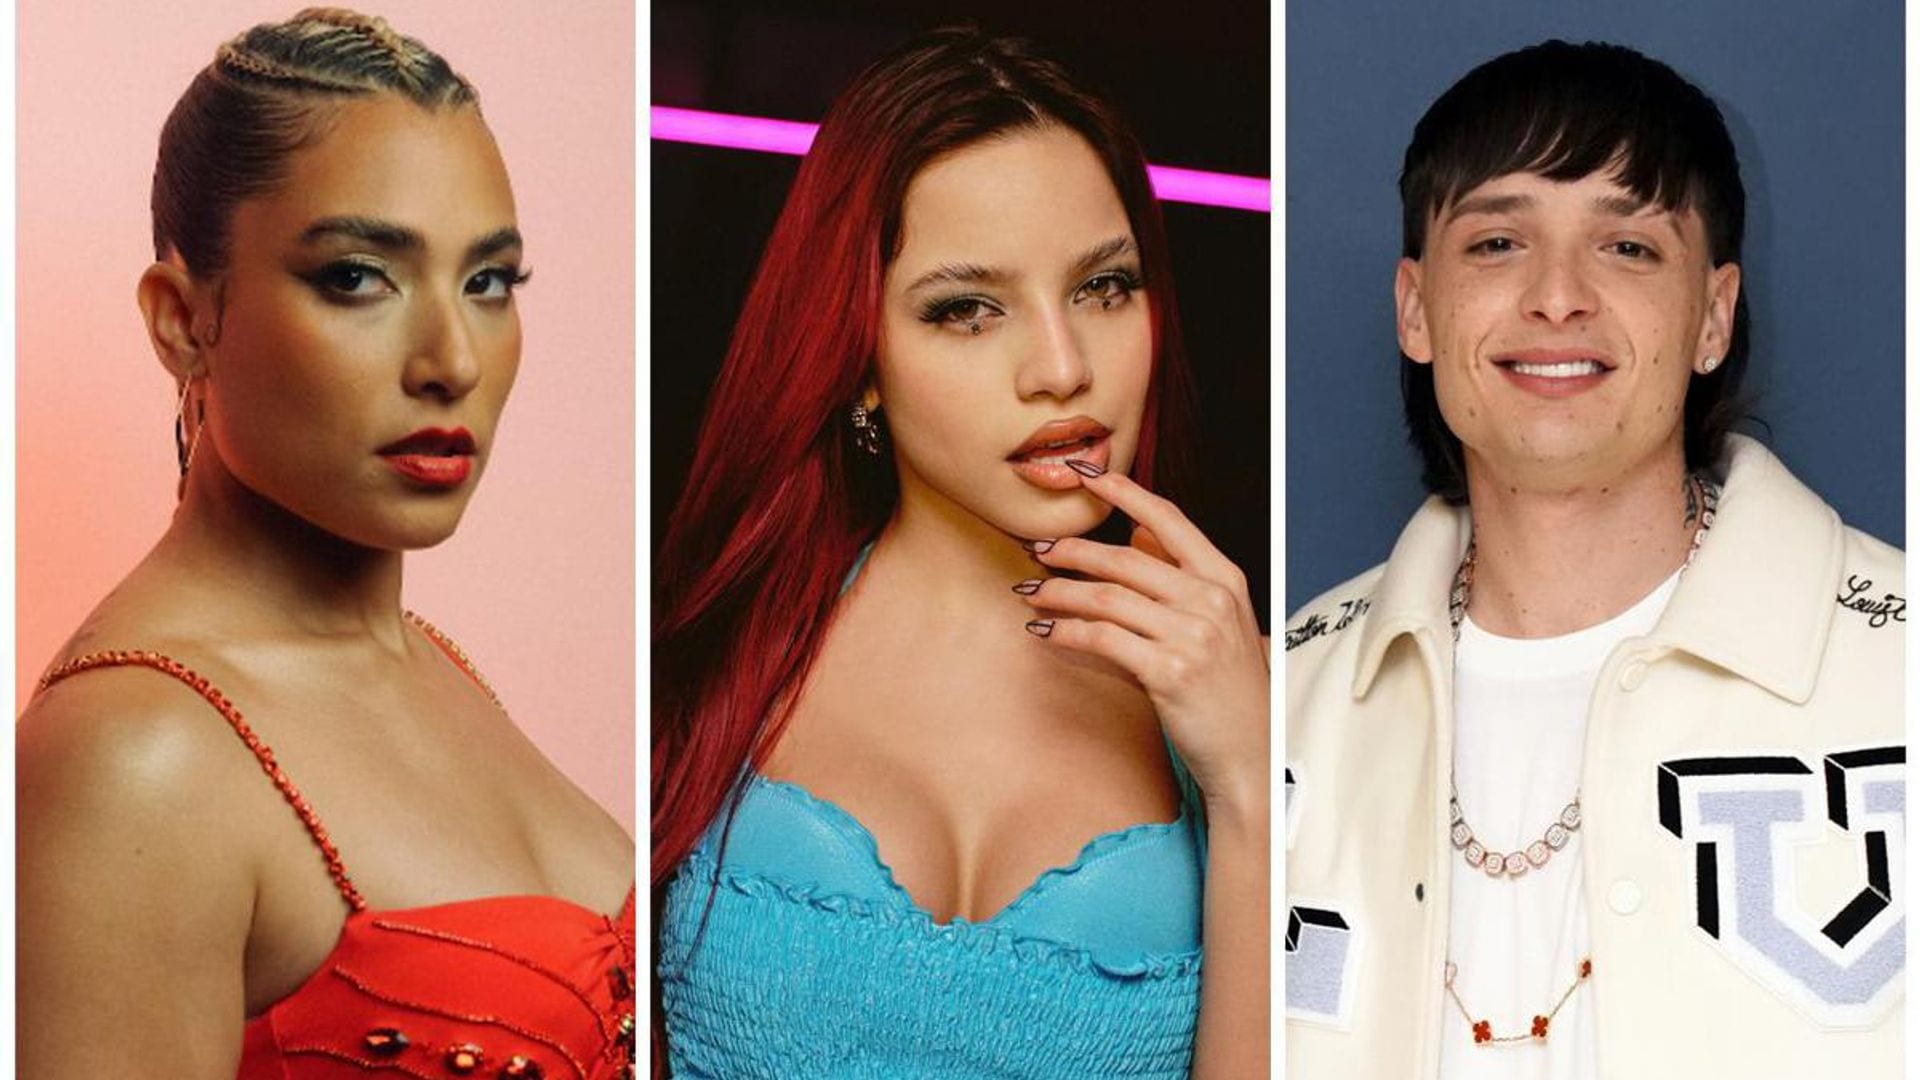 New Music Friday: The hottest releases from Emilia, Letón Pé, Olivia Rodrigo, and more